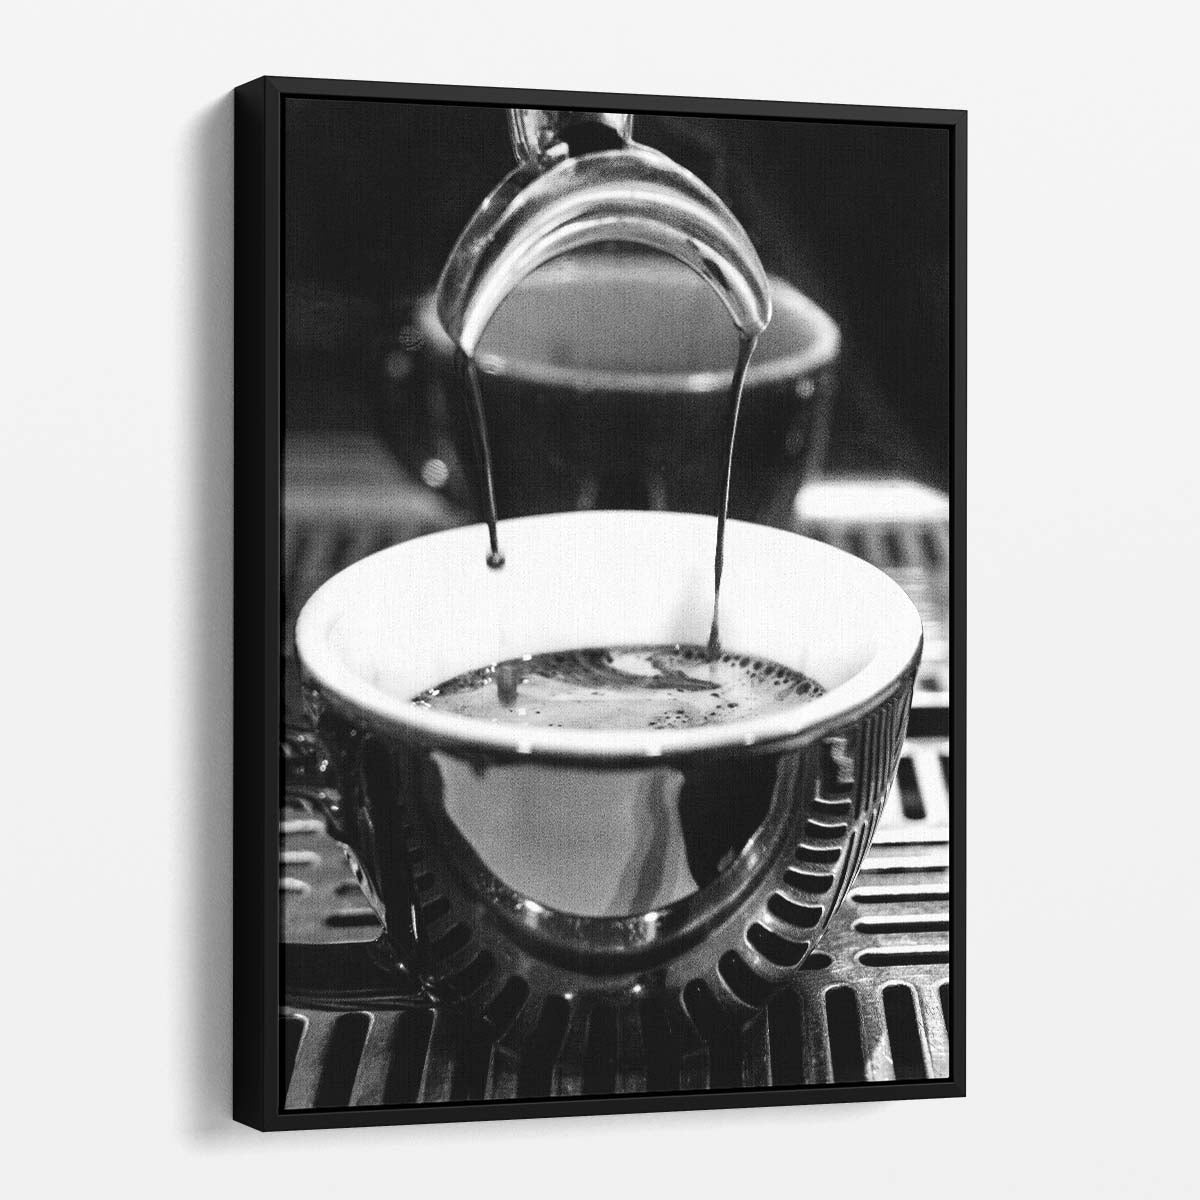 Monochrome Still Life Photography of Espresso Dripping in Café Mug by Luxuriance Designs, made in USA